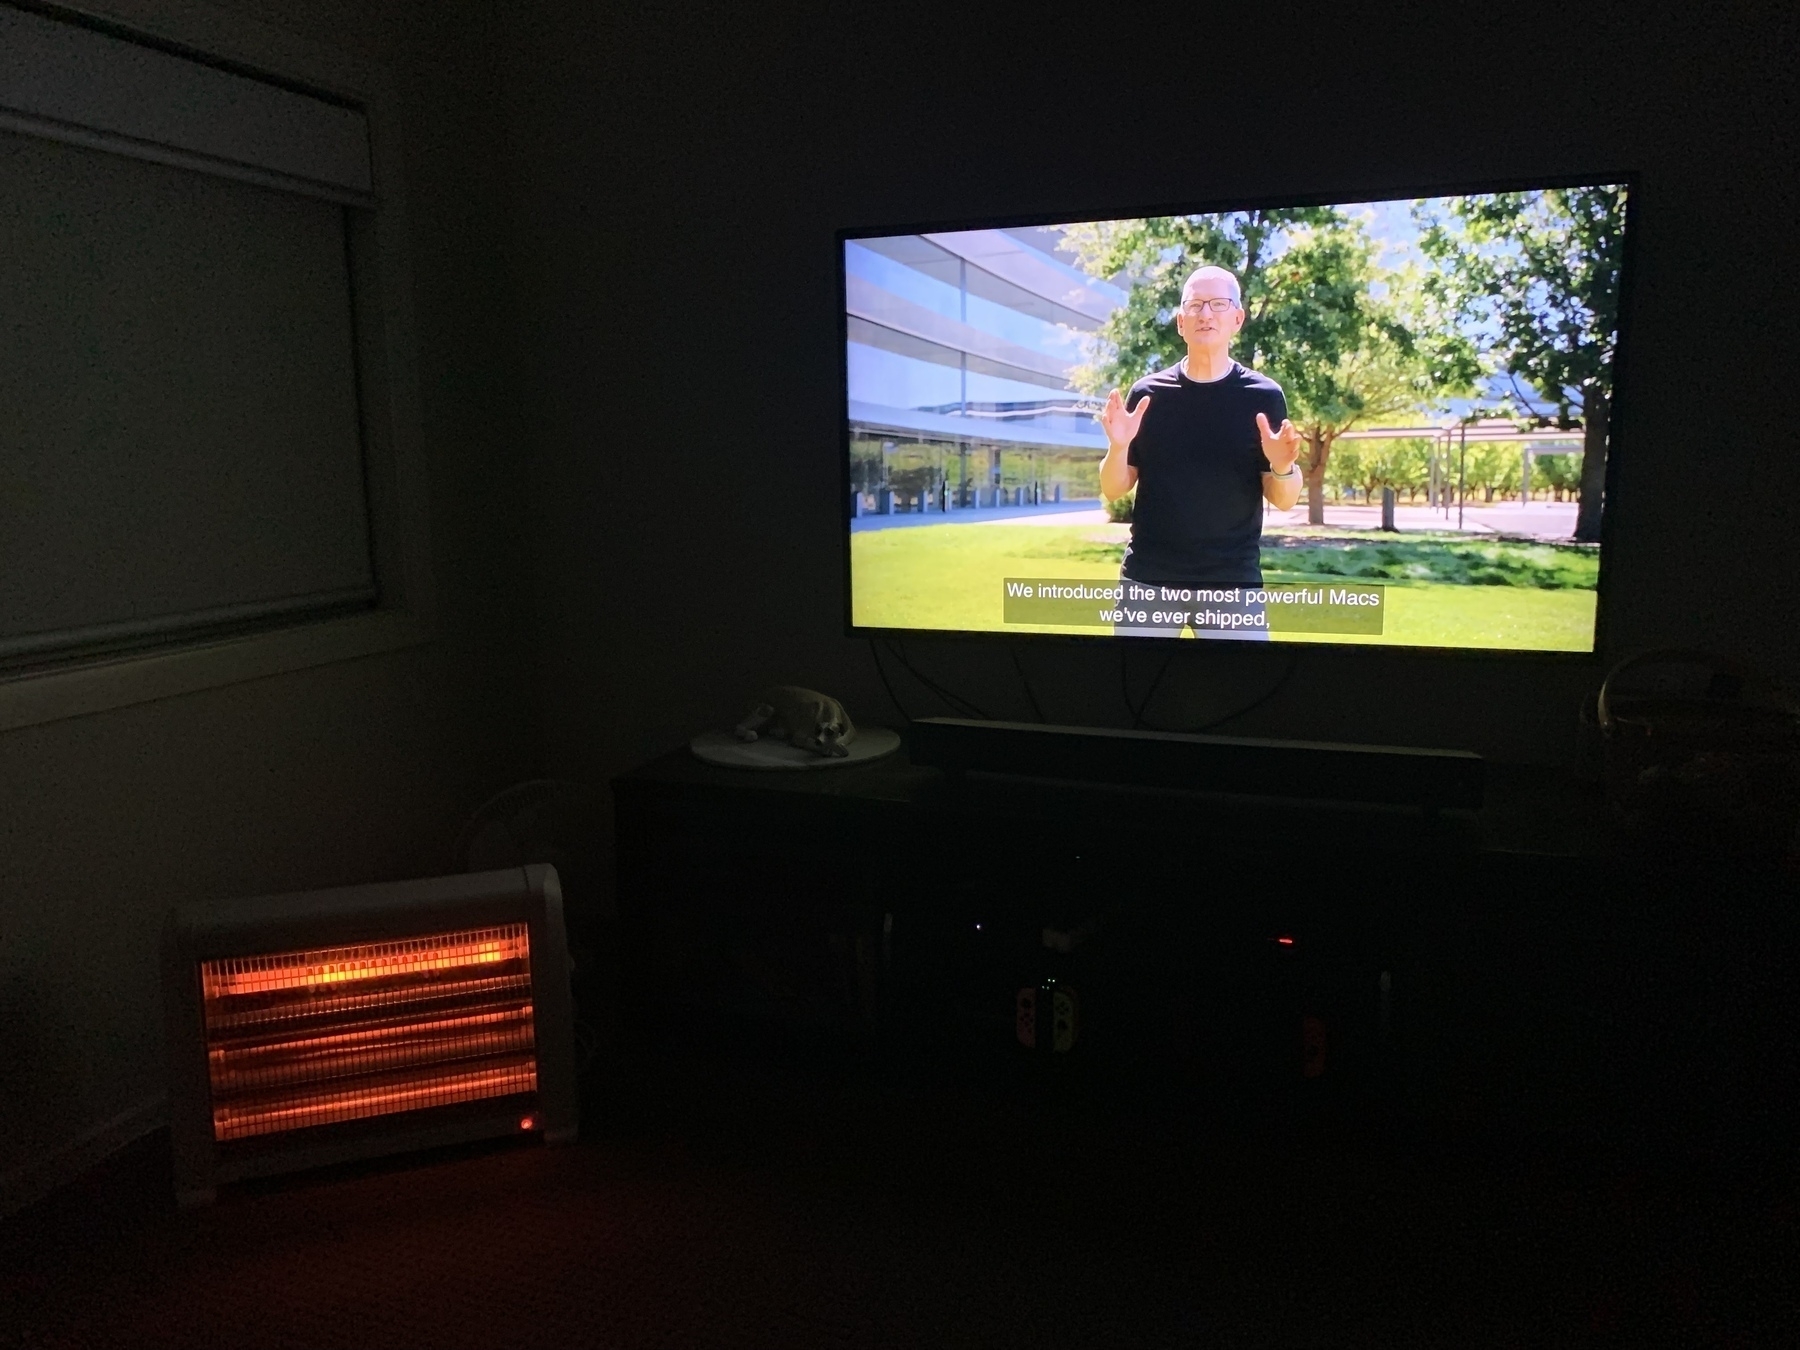 A dark room illuminated only by the glow of an electric heater and a television showing Tim Cook presenting Apple’s September event.